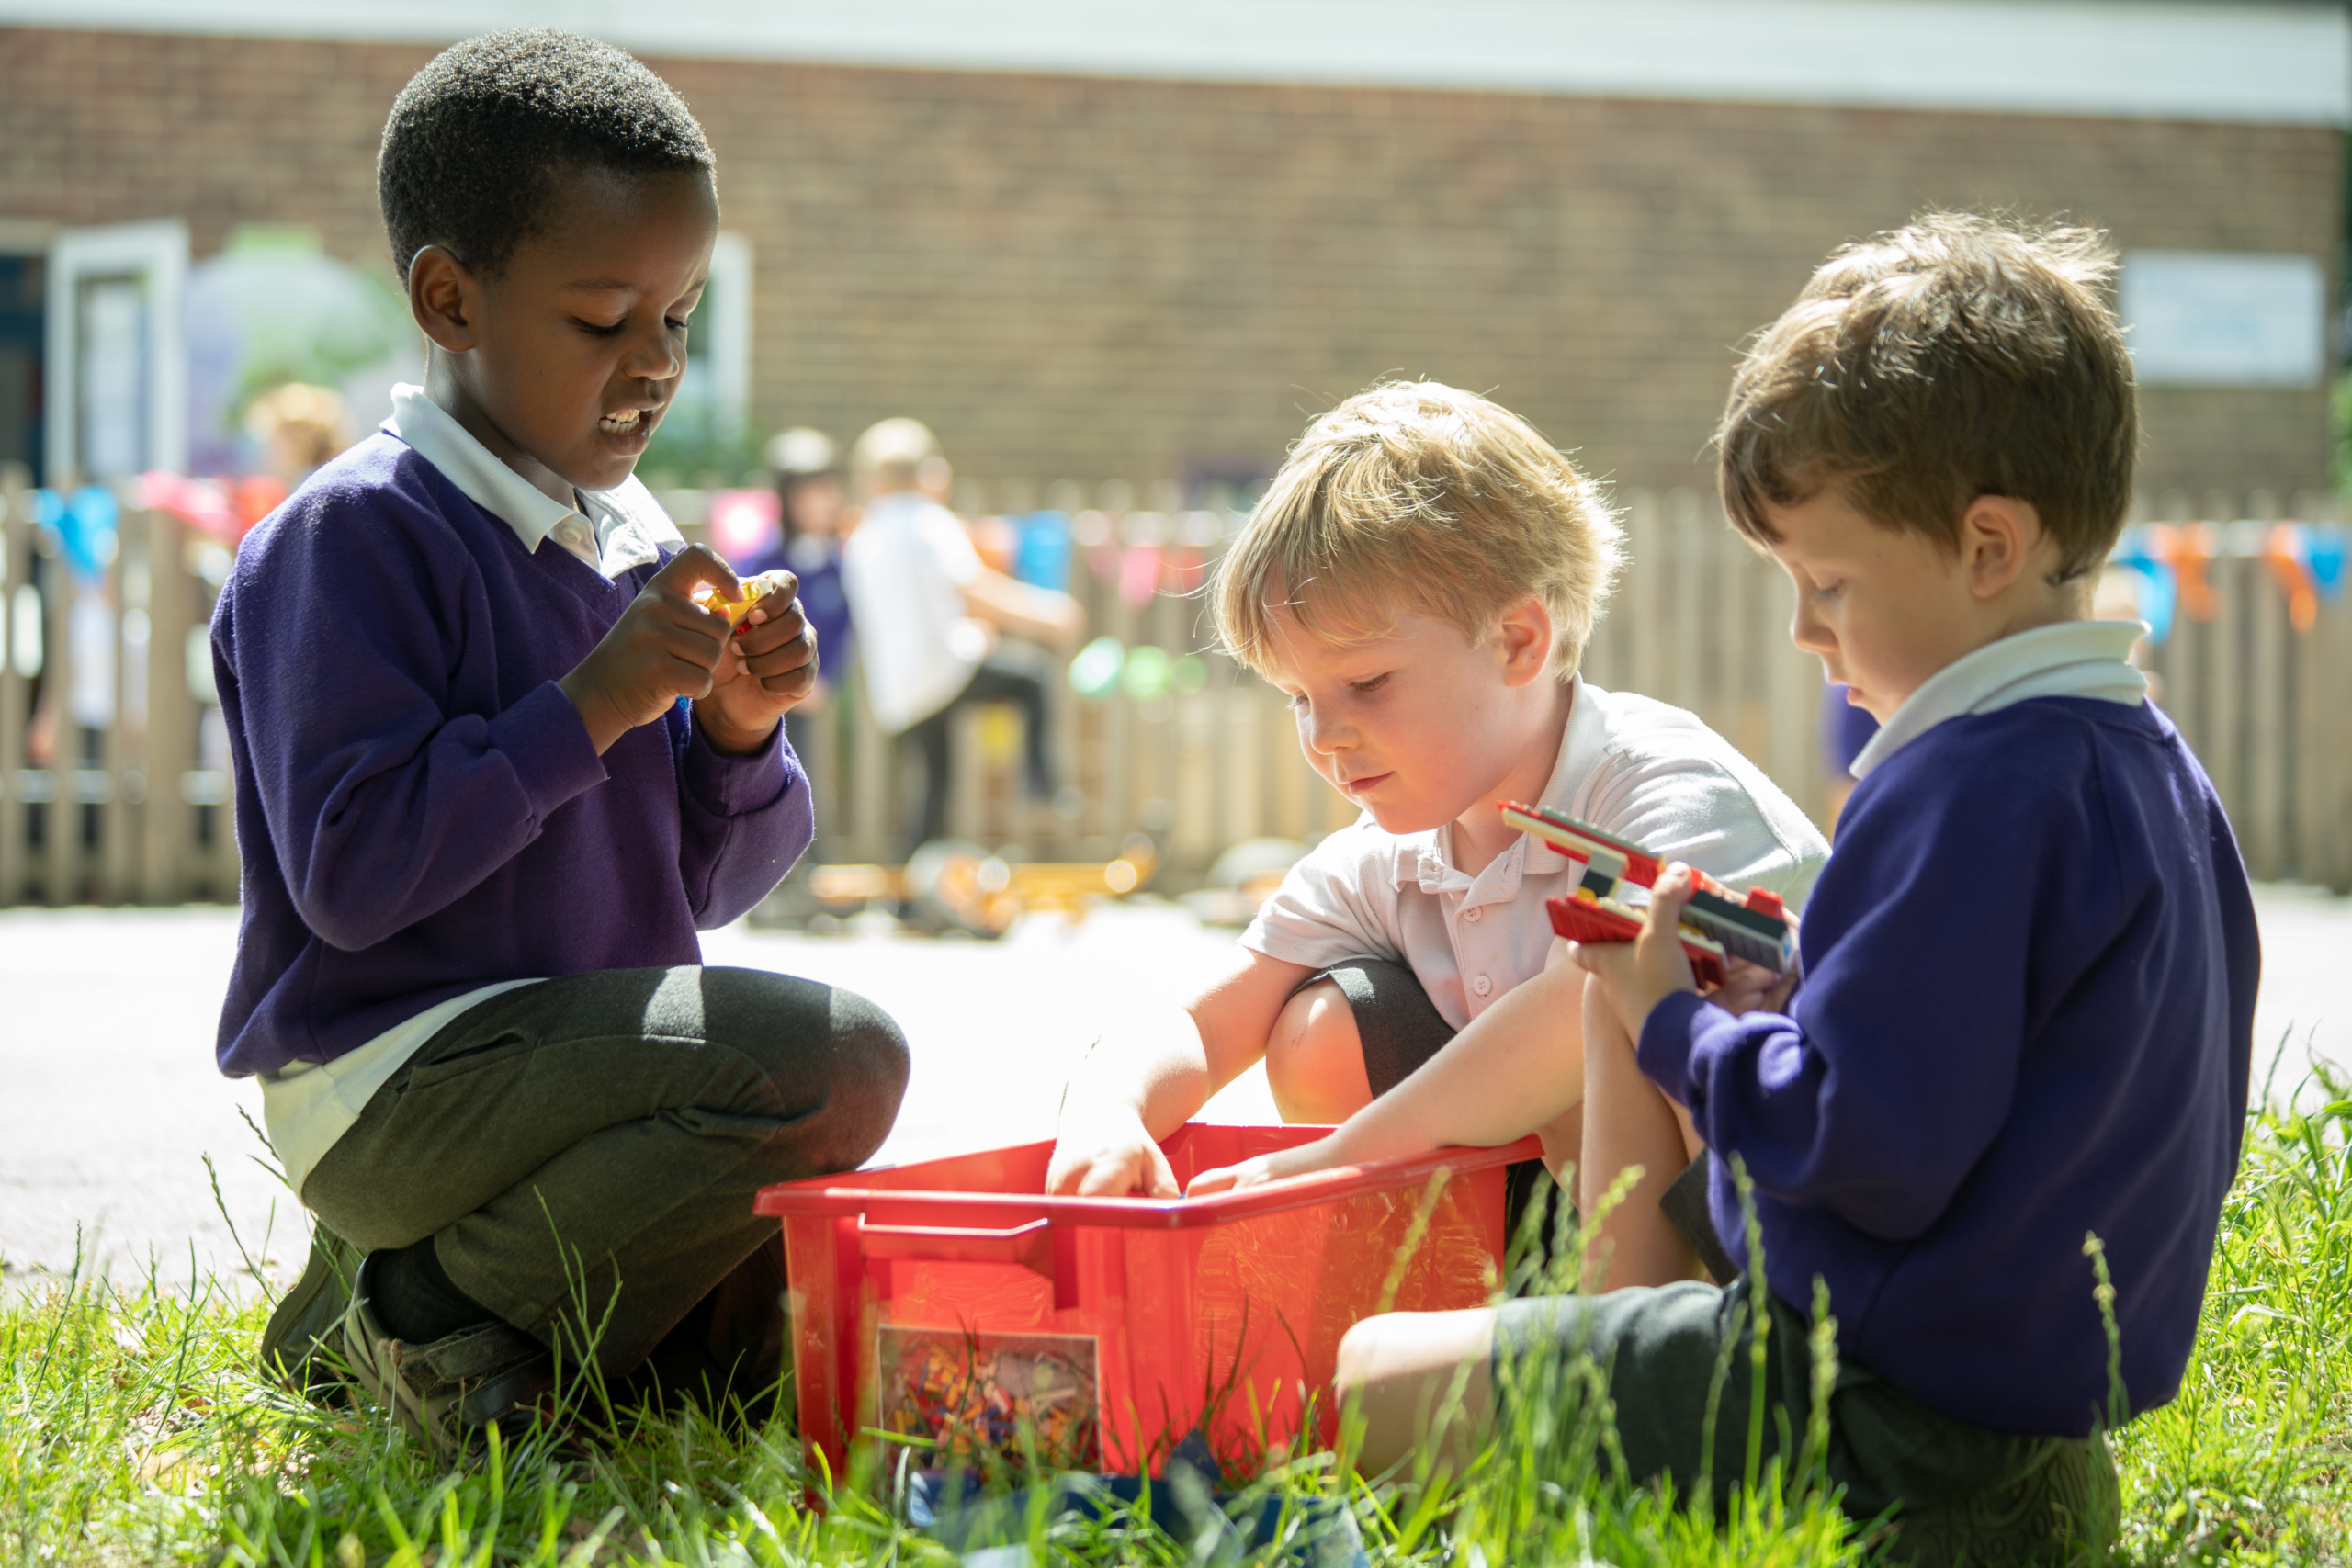 Three young pupils are shown playing together with a box of Lego on the school playground.